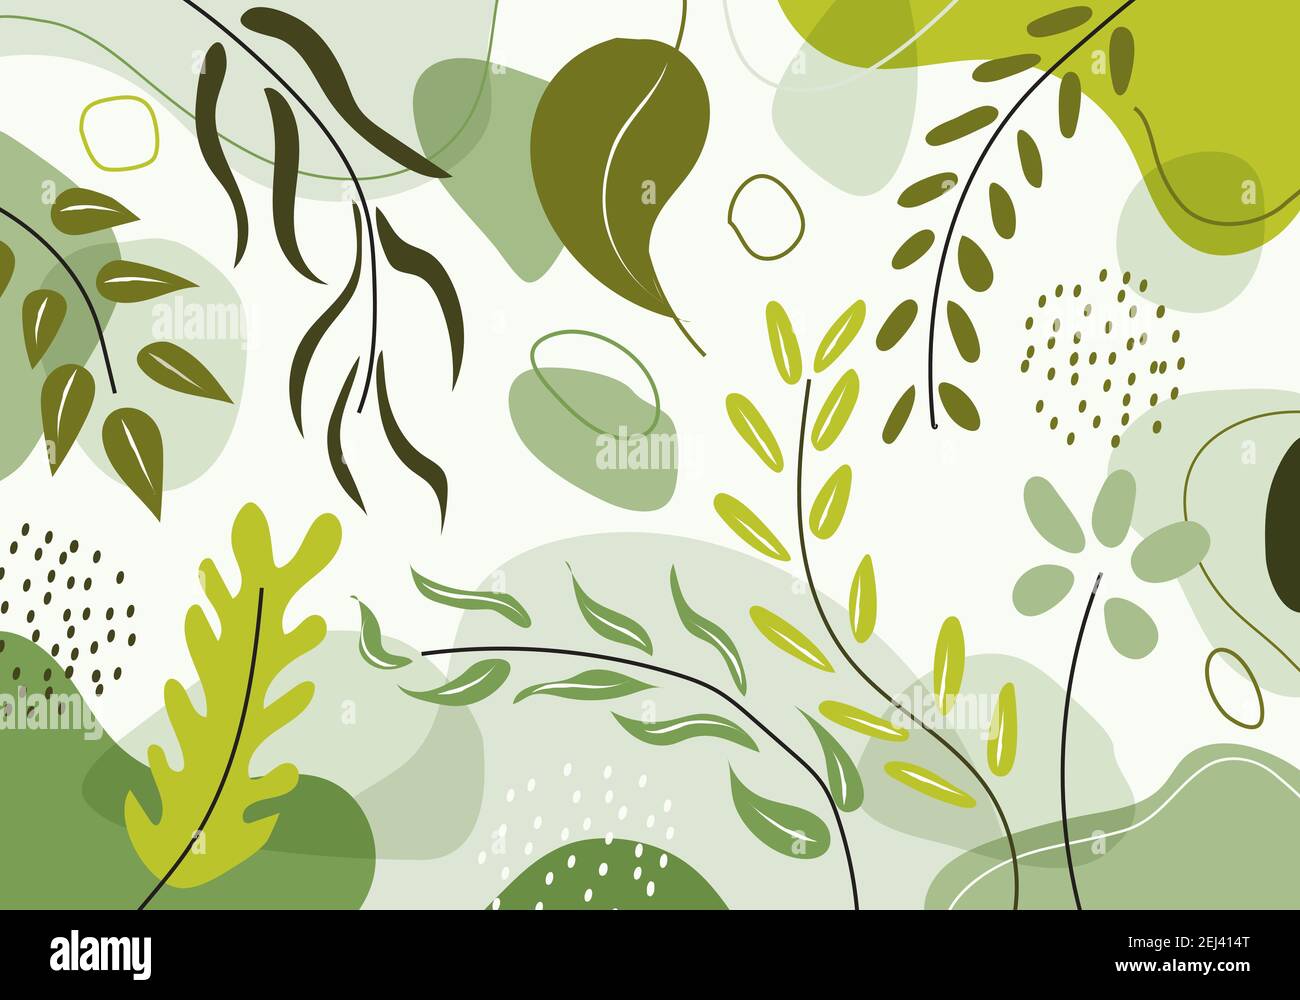 Hand drawn organic shapes green natural leaves, floral, line art